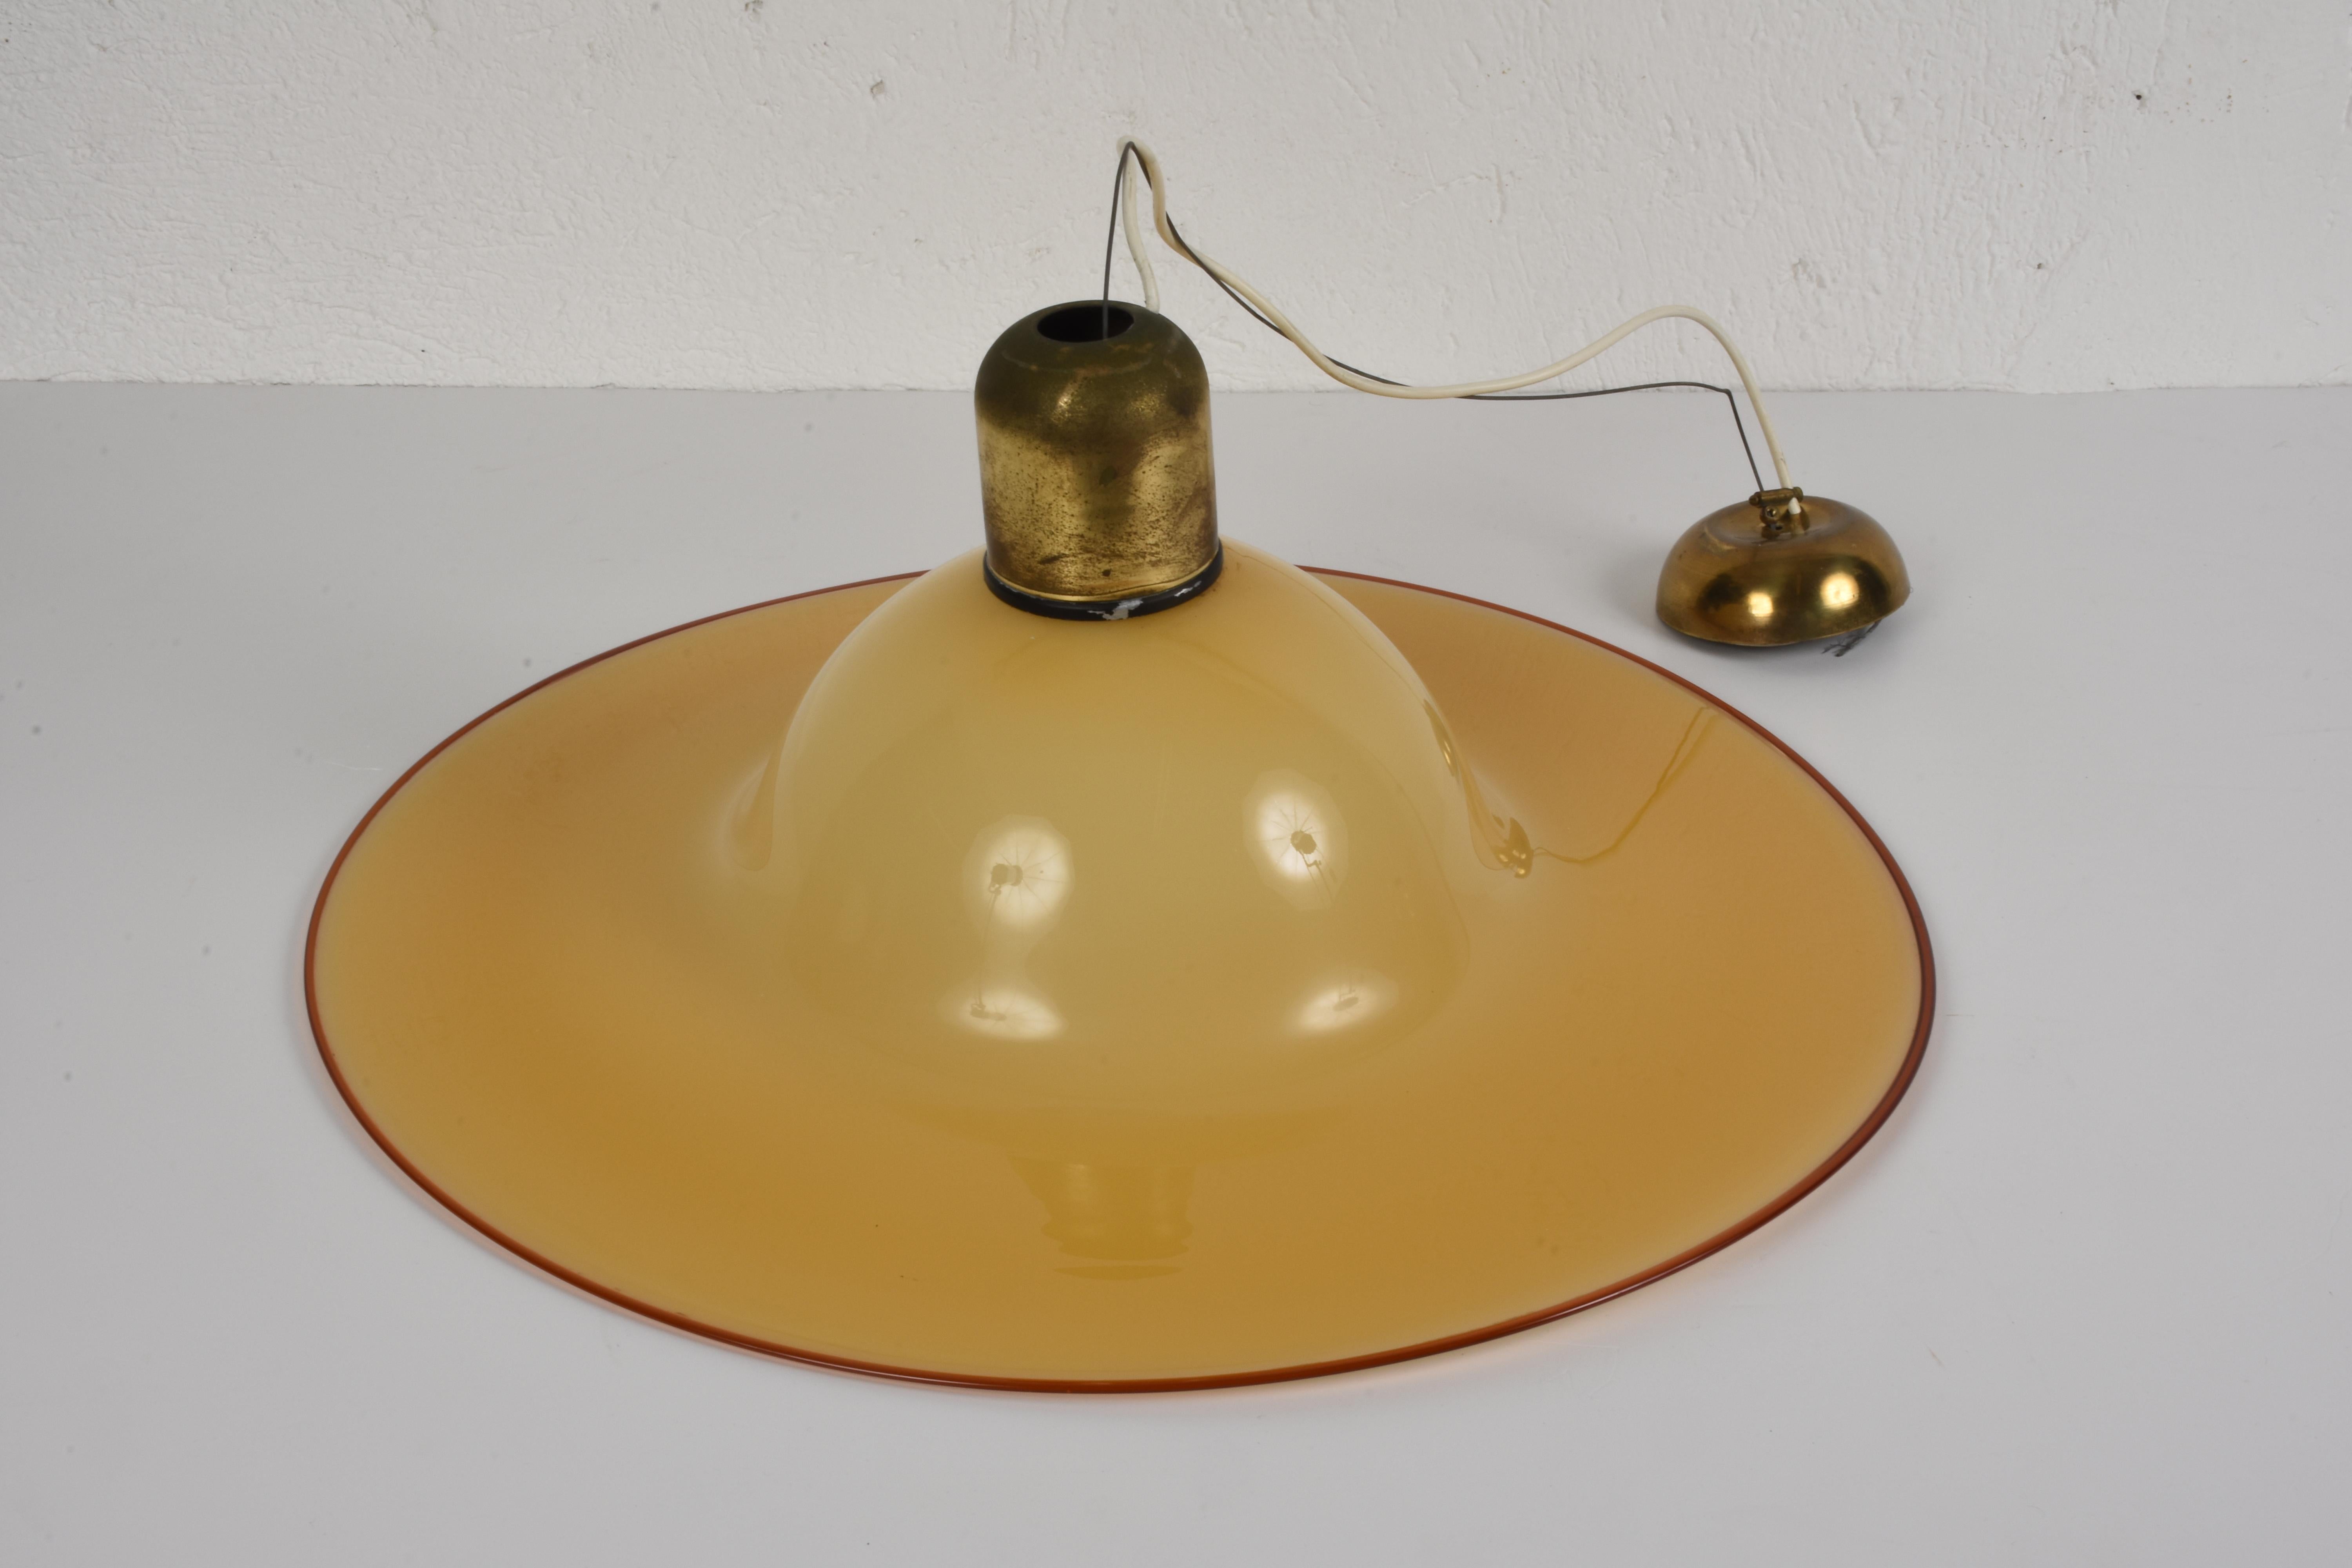 Very elegant bell form amber hand blown Murano glass chandelier, produced by Murano glass master Archimede Seguso.

The item is a Classic midcentury designed chandelier and comes with a stylized brass ring top canopy and fabric coiled cord. The